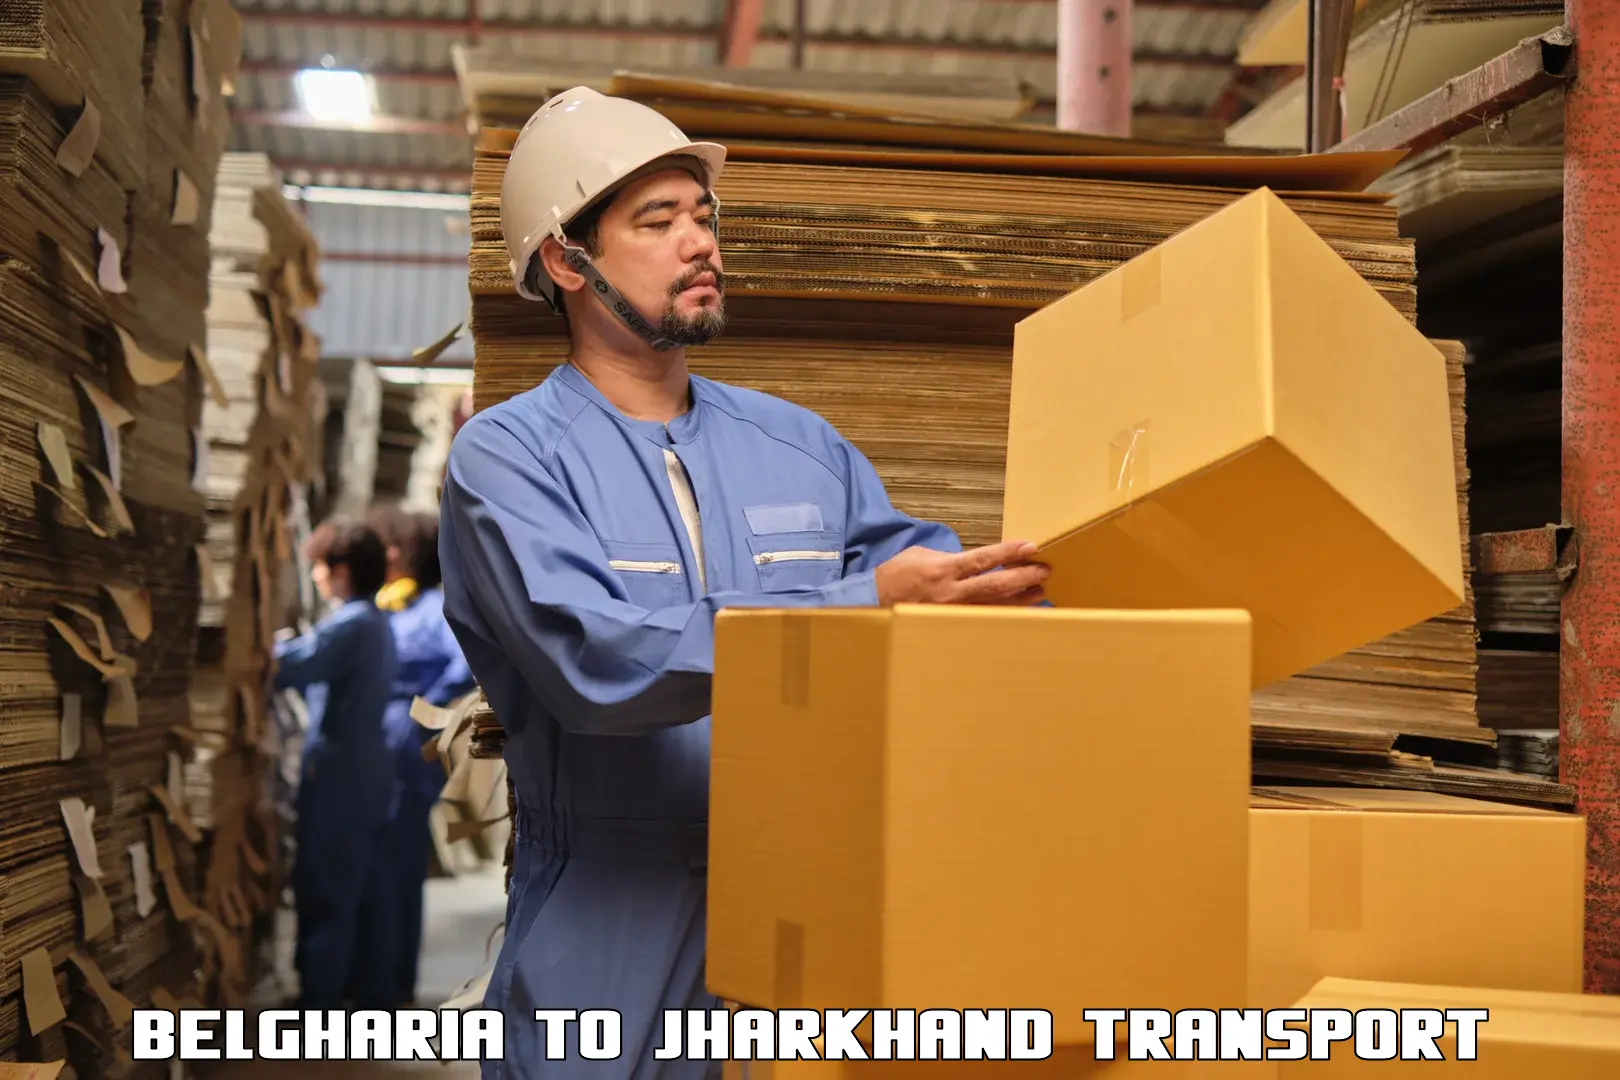 Road transport online services in Belgharia to Dhanbad